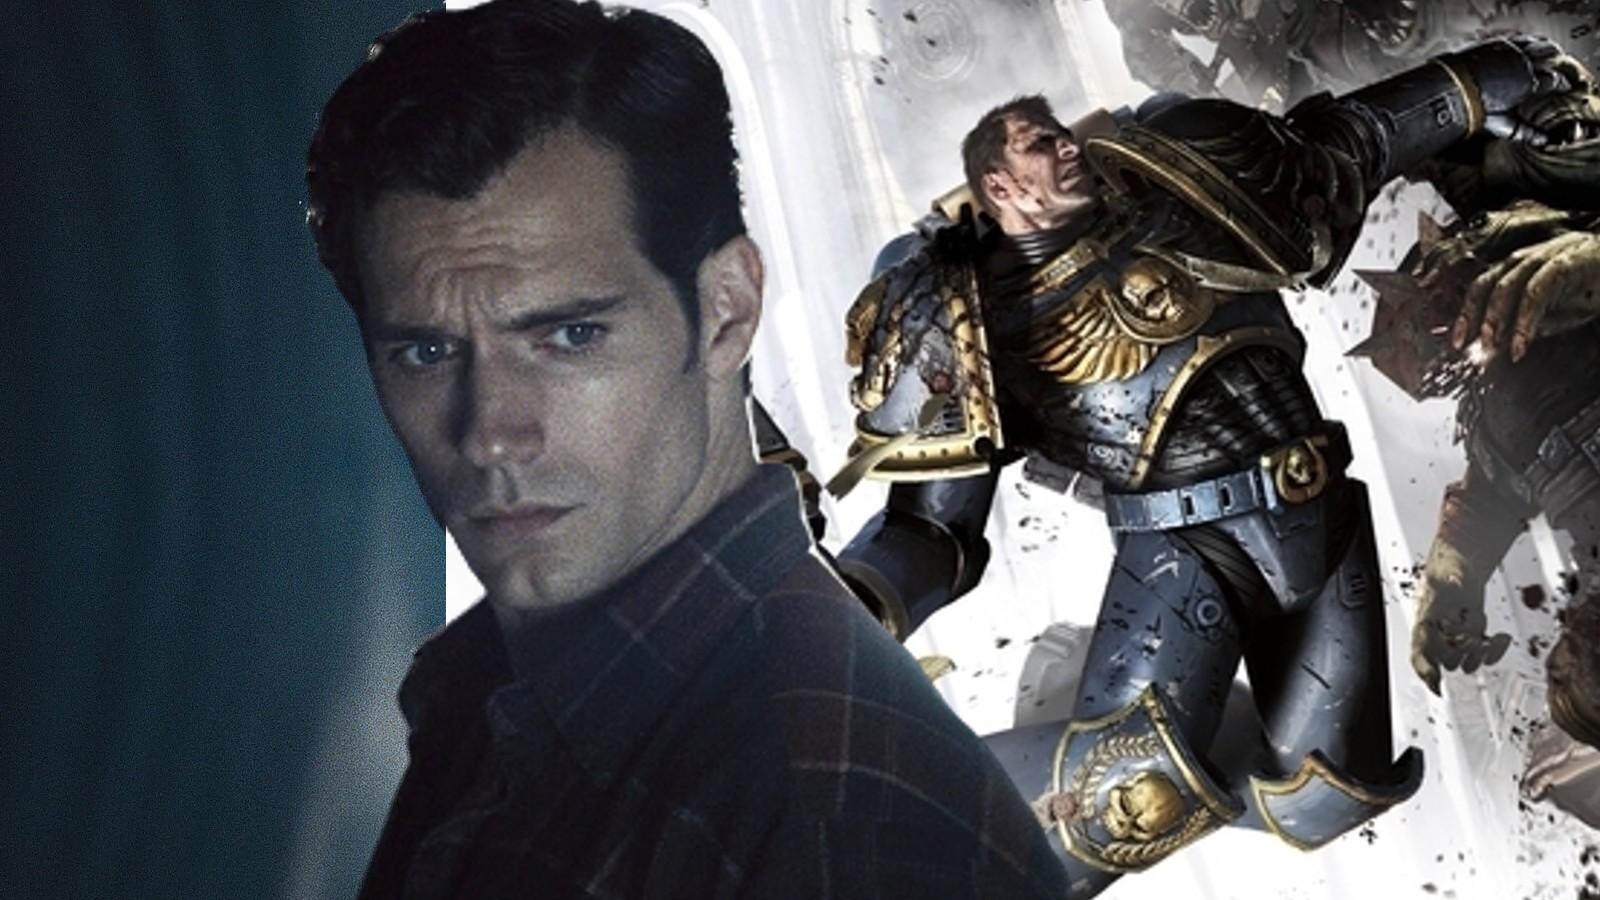 Henry Cavill in Man of Steel and the poster for Warhammer 40,000 Space Marine